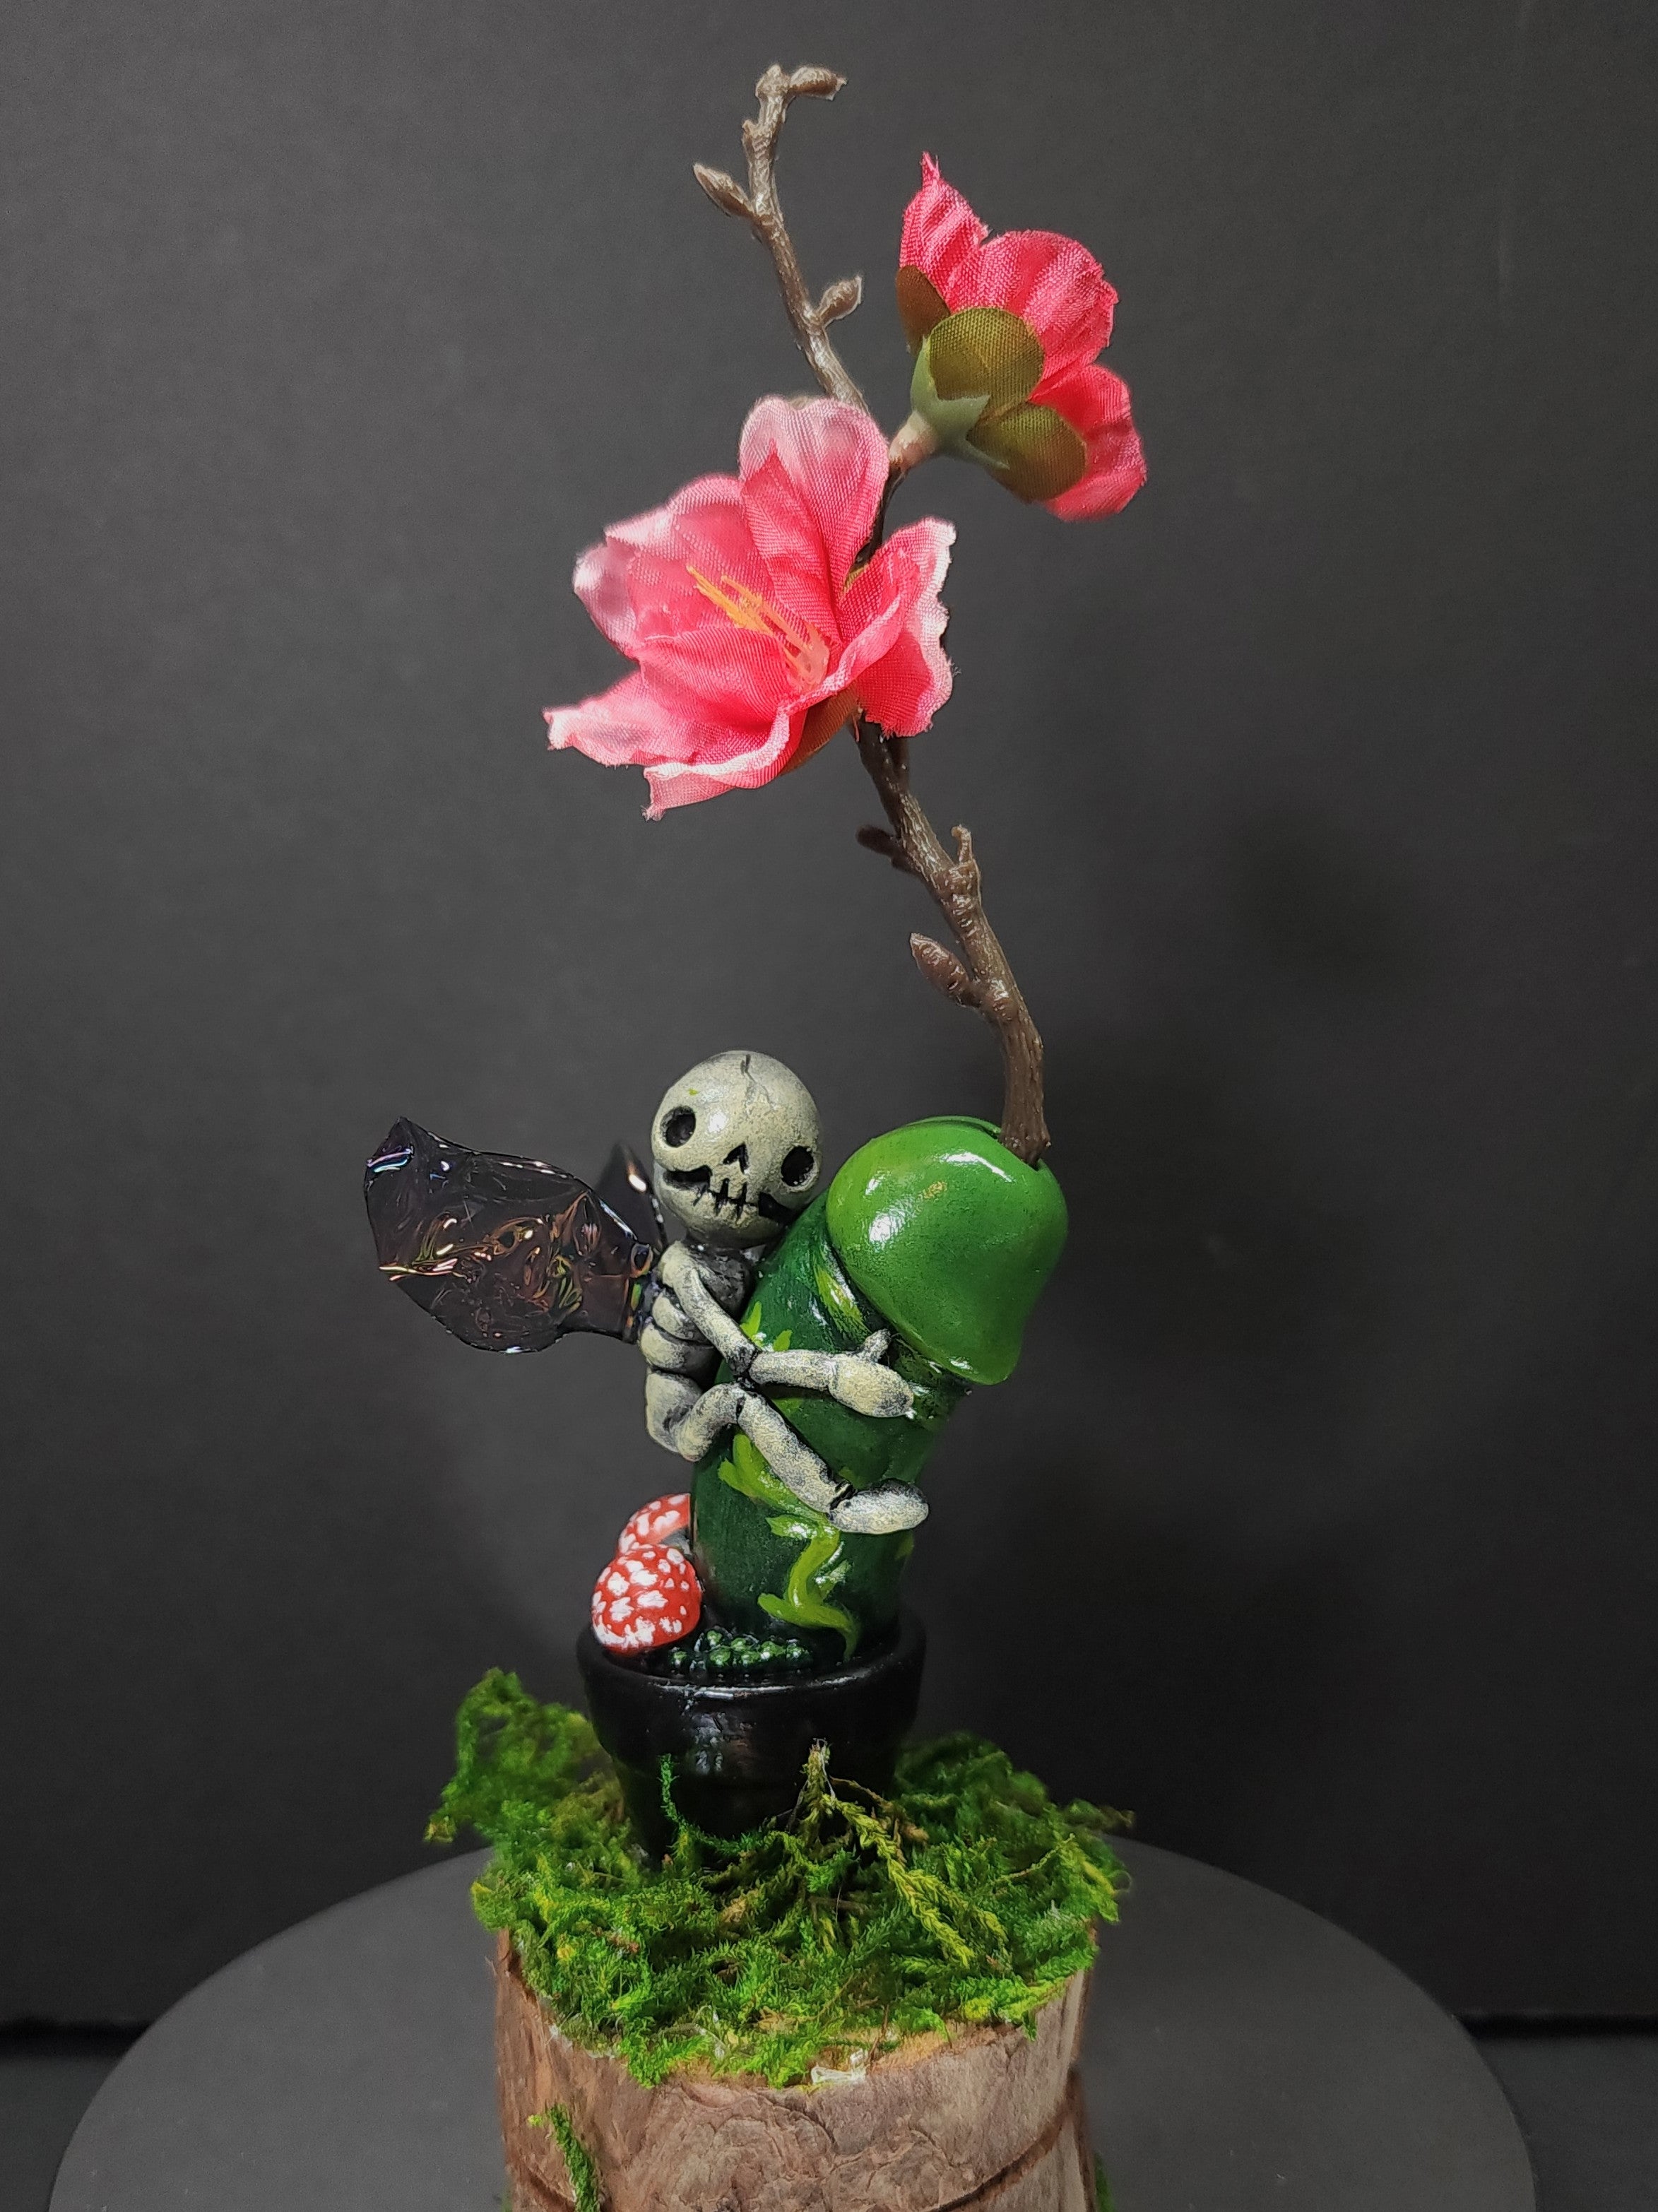 A small statue of a skeleton holding a flower, a mossy tree stump, a toy figurine of a skeleton hugging a green pepper, a black object, a mushroom, a plant, a green object, and a flower.